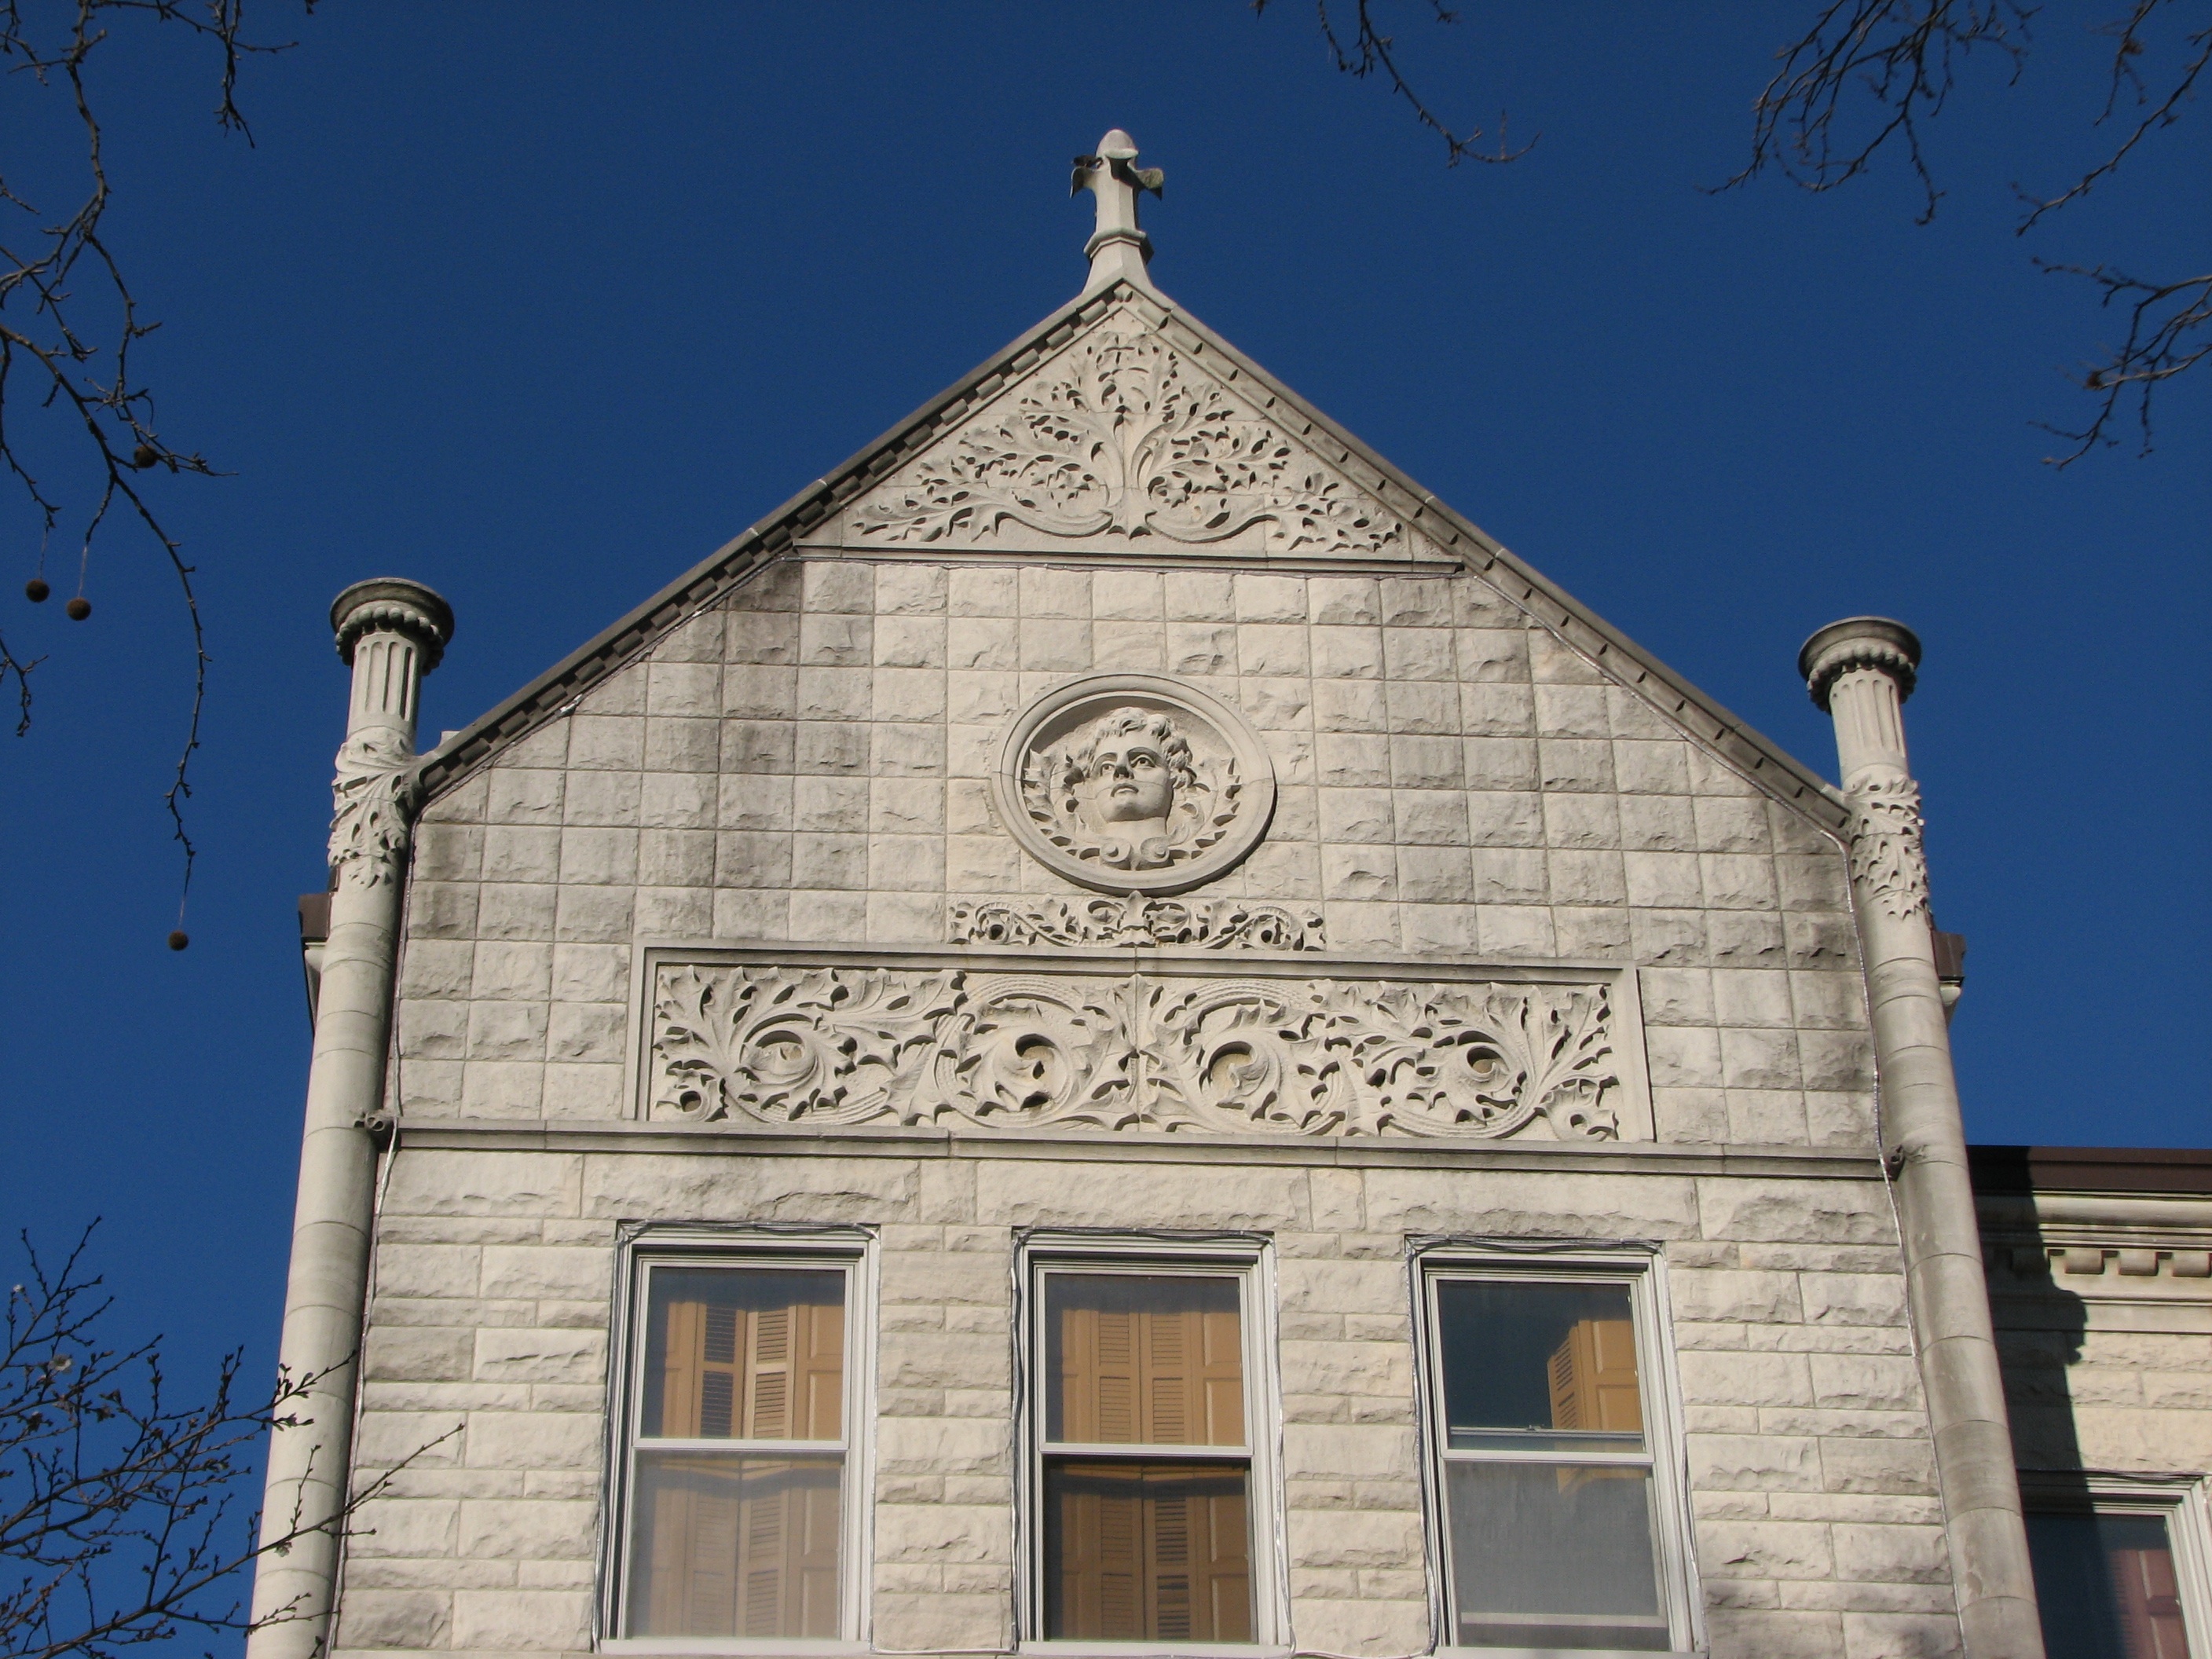 Decker chose the Norman Gothic style for the roof and ornament of the house.